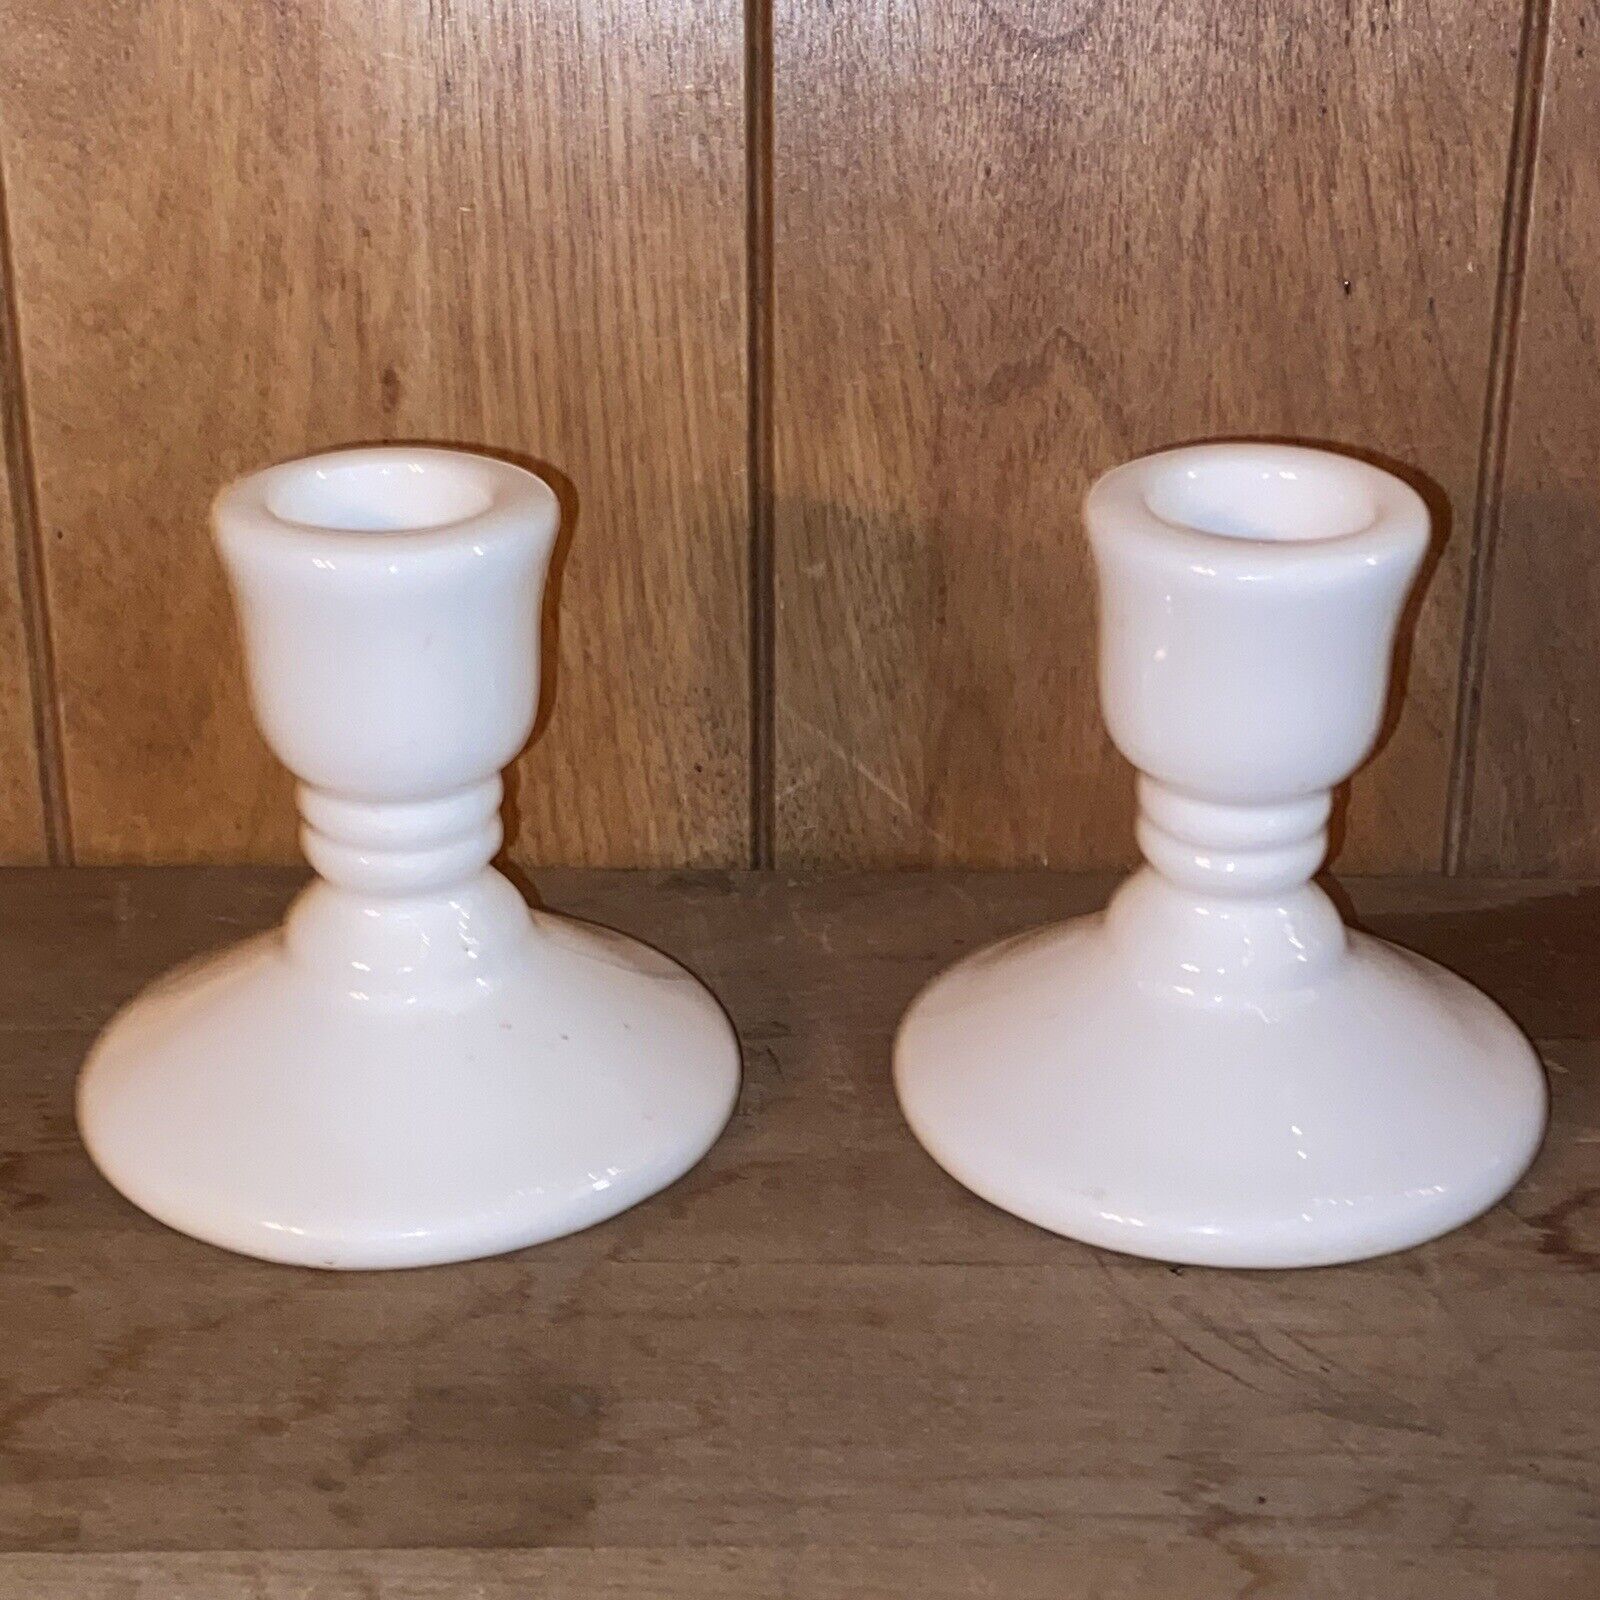 Vintage Pair of White Ceramic Taper Candle Holders Made in Korea Compliments